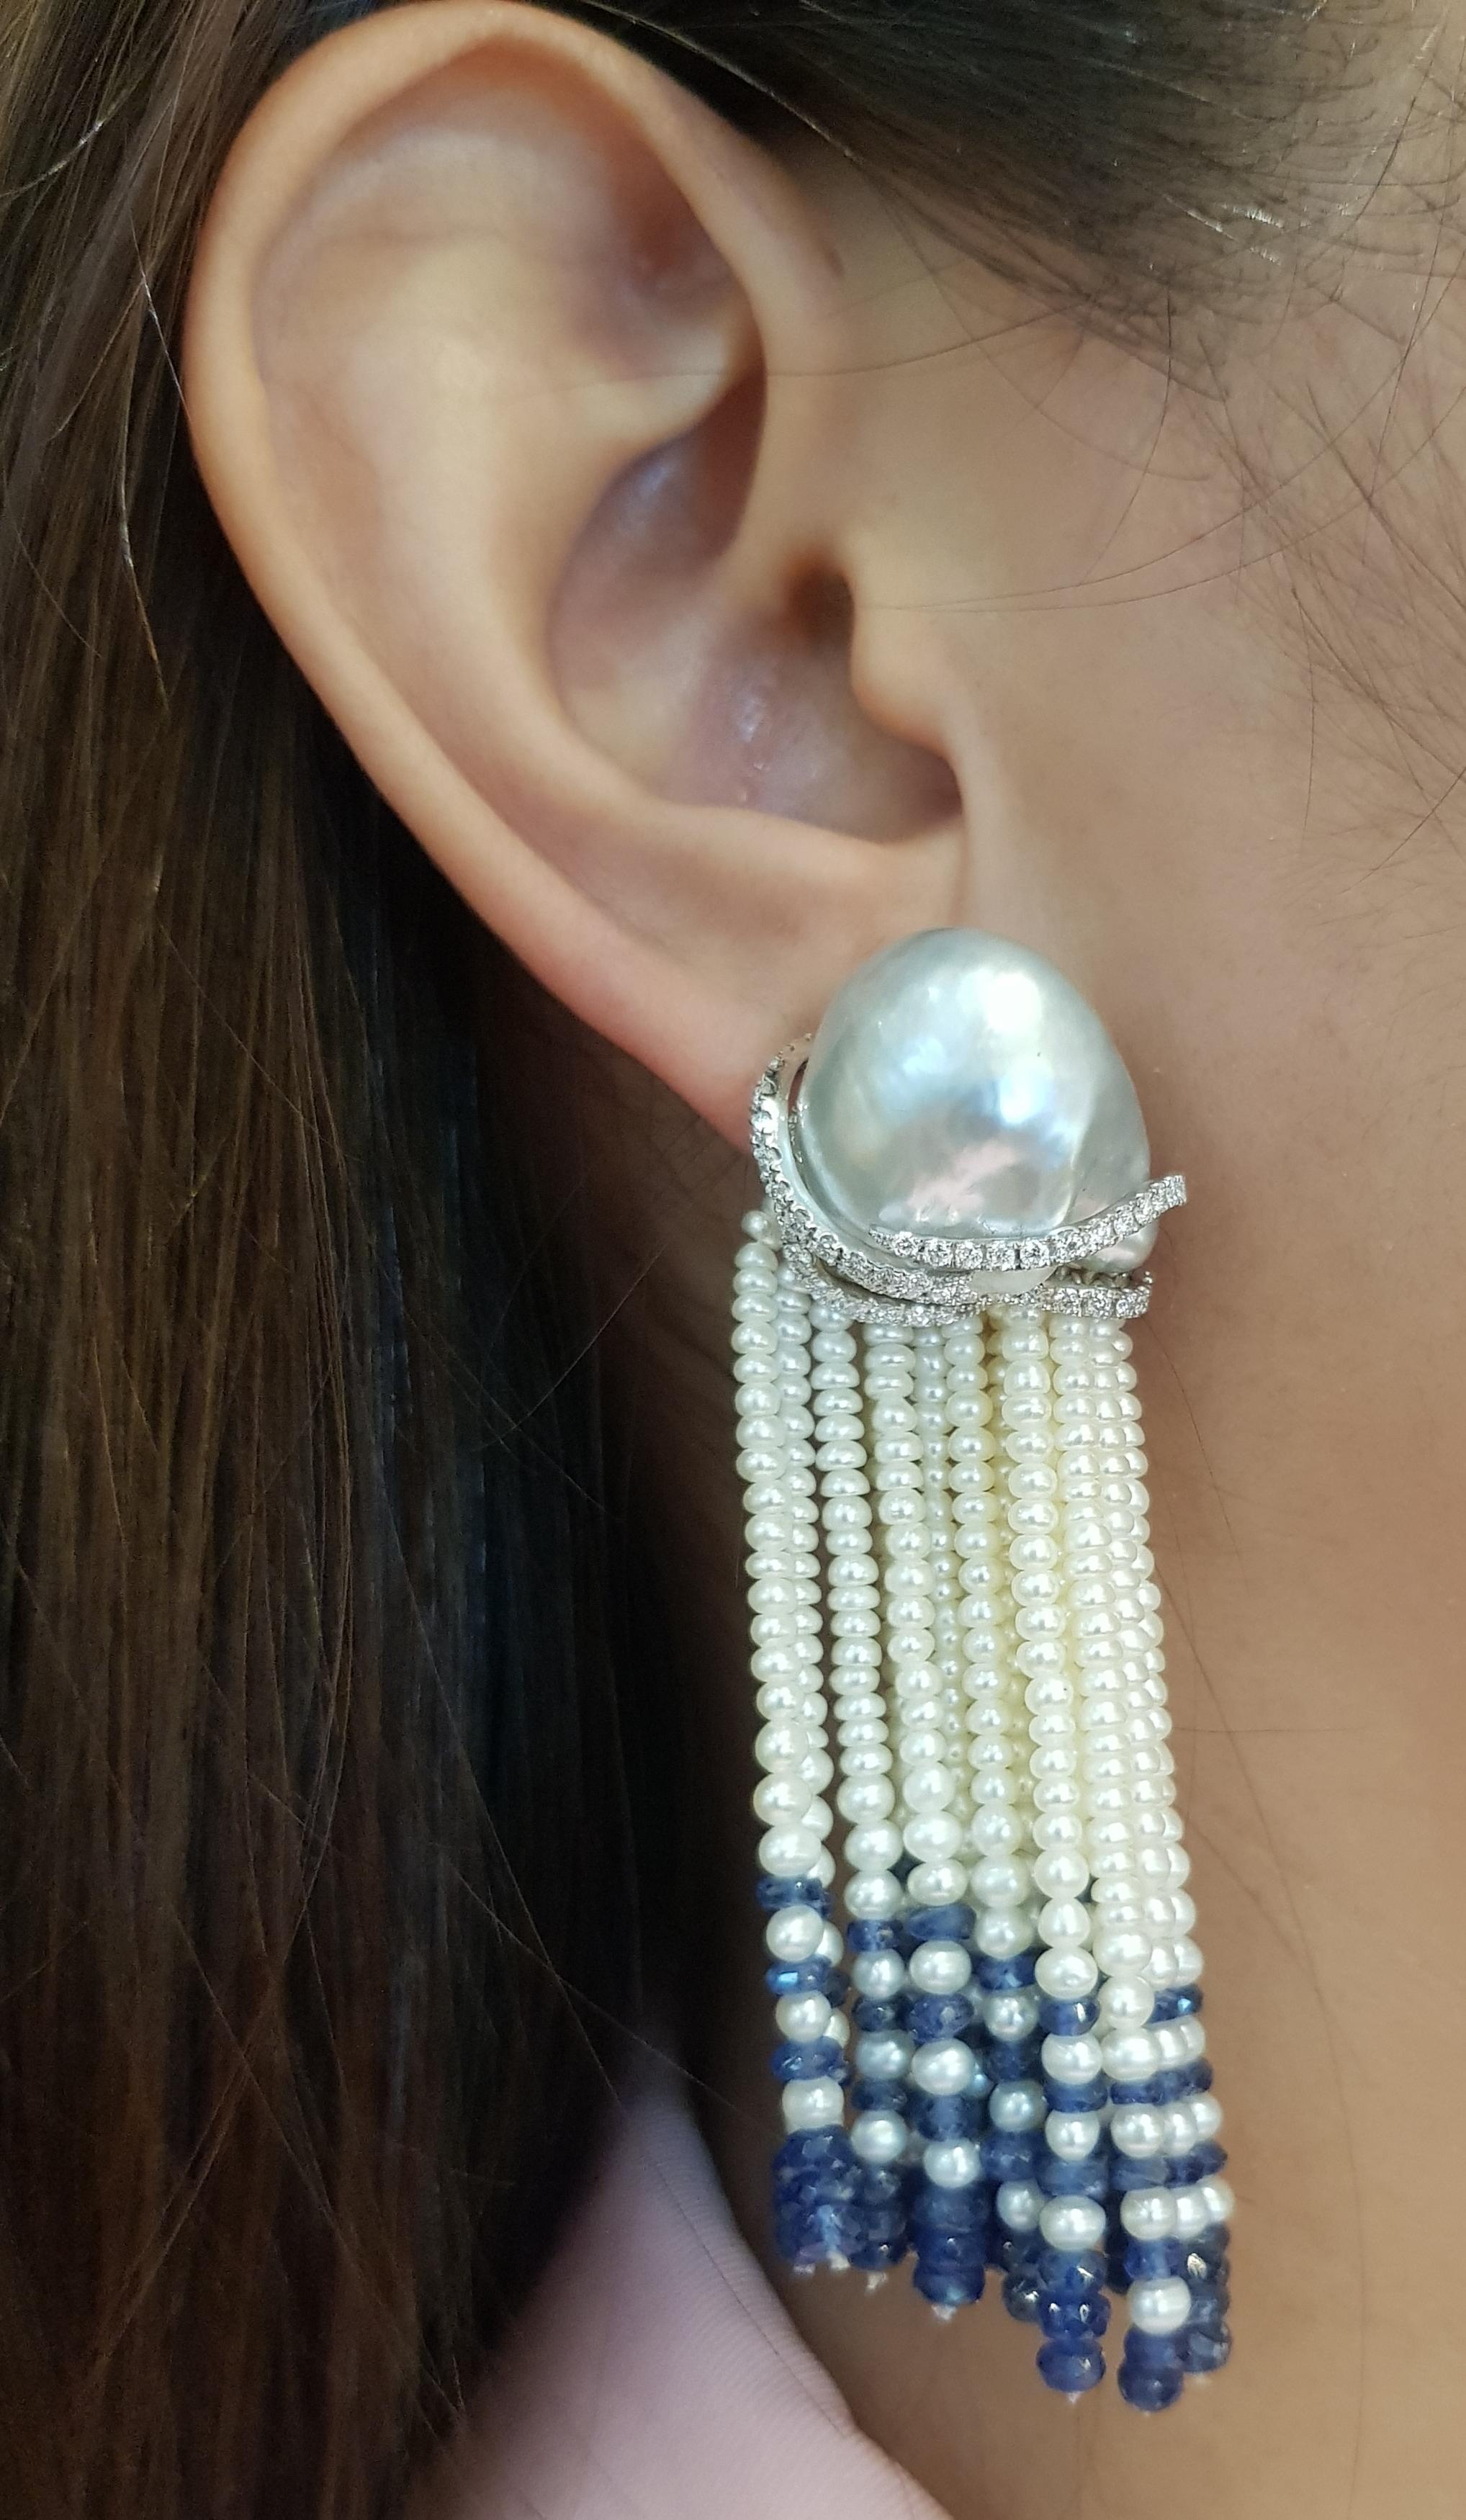 South Sea Pearl, Blue Sapphire Beads 51.84 carats and Diamond 1.00 carat Earrings set in 18 Karat White Gold Settings

Width:  2.2 cm 
Length:  7.0 cm
Total Weight: 44.23 grams

